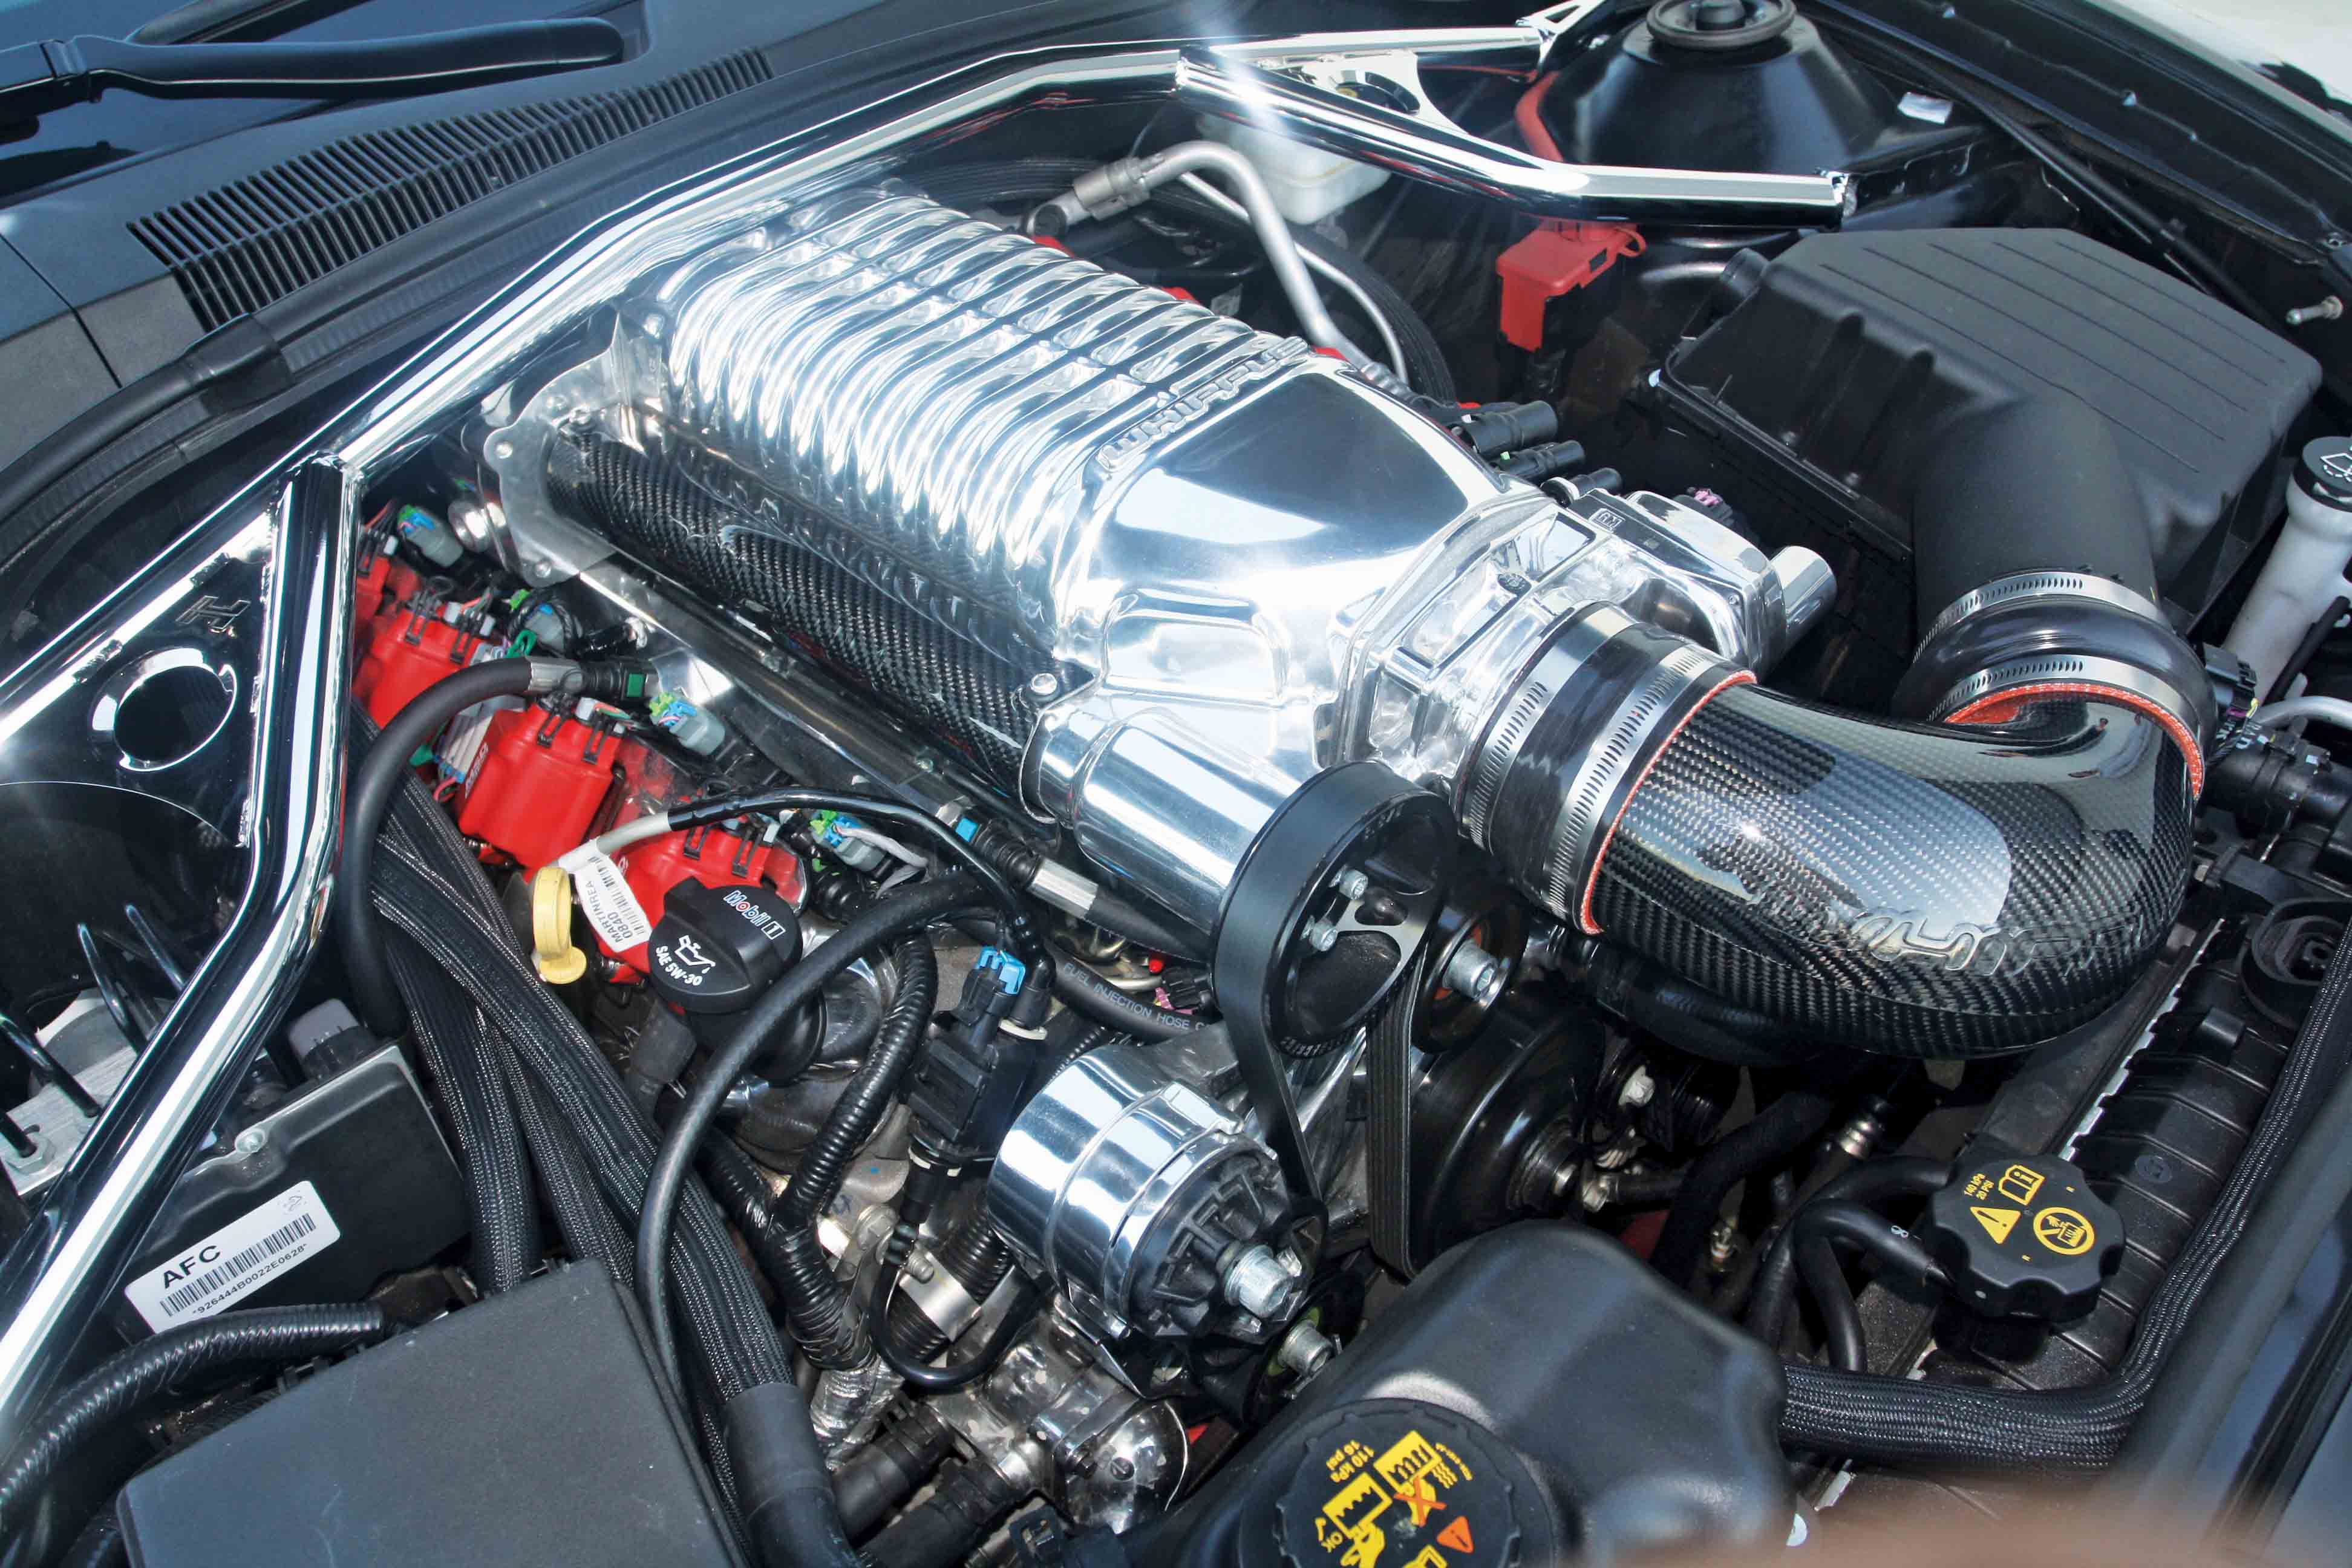 Thanks to the Whipple supercharger there is no shortage of power or style. 